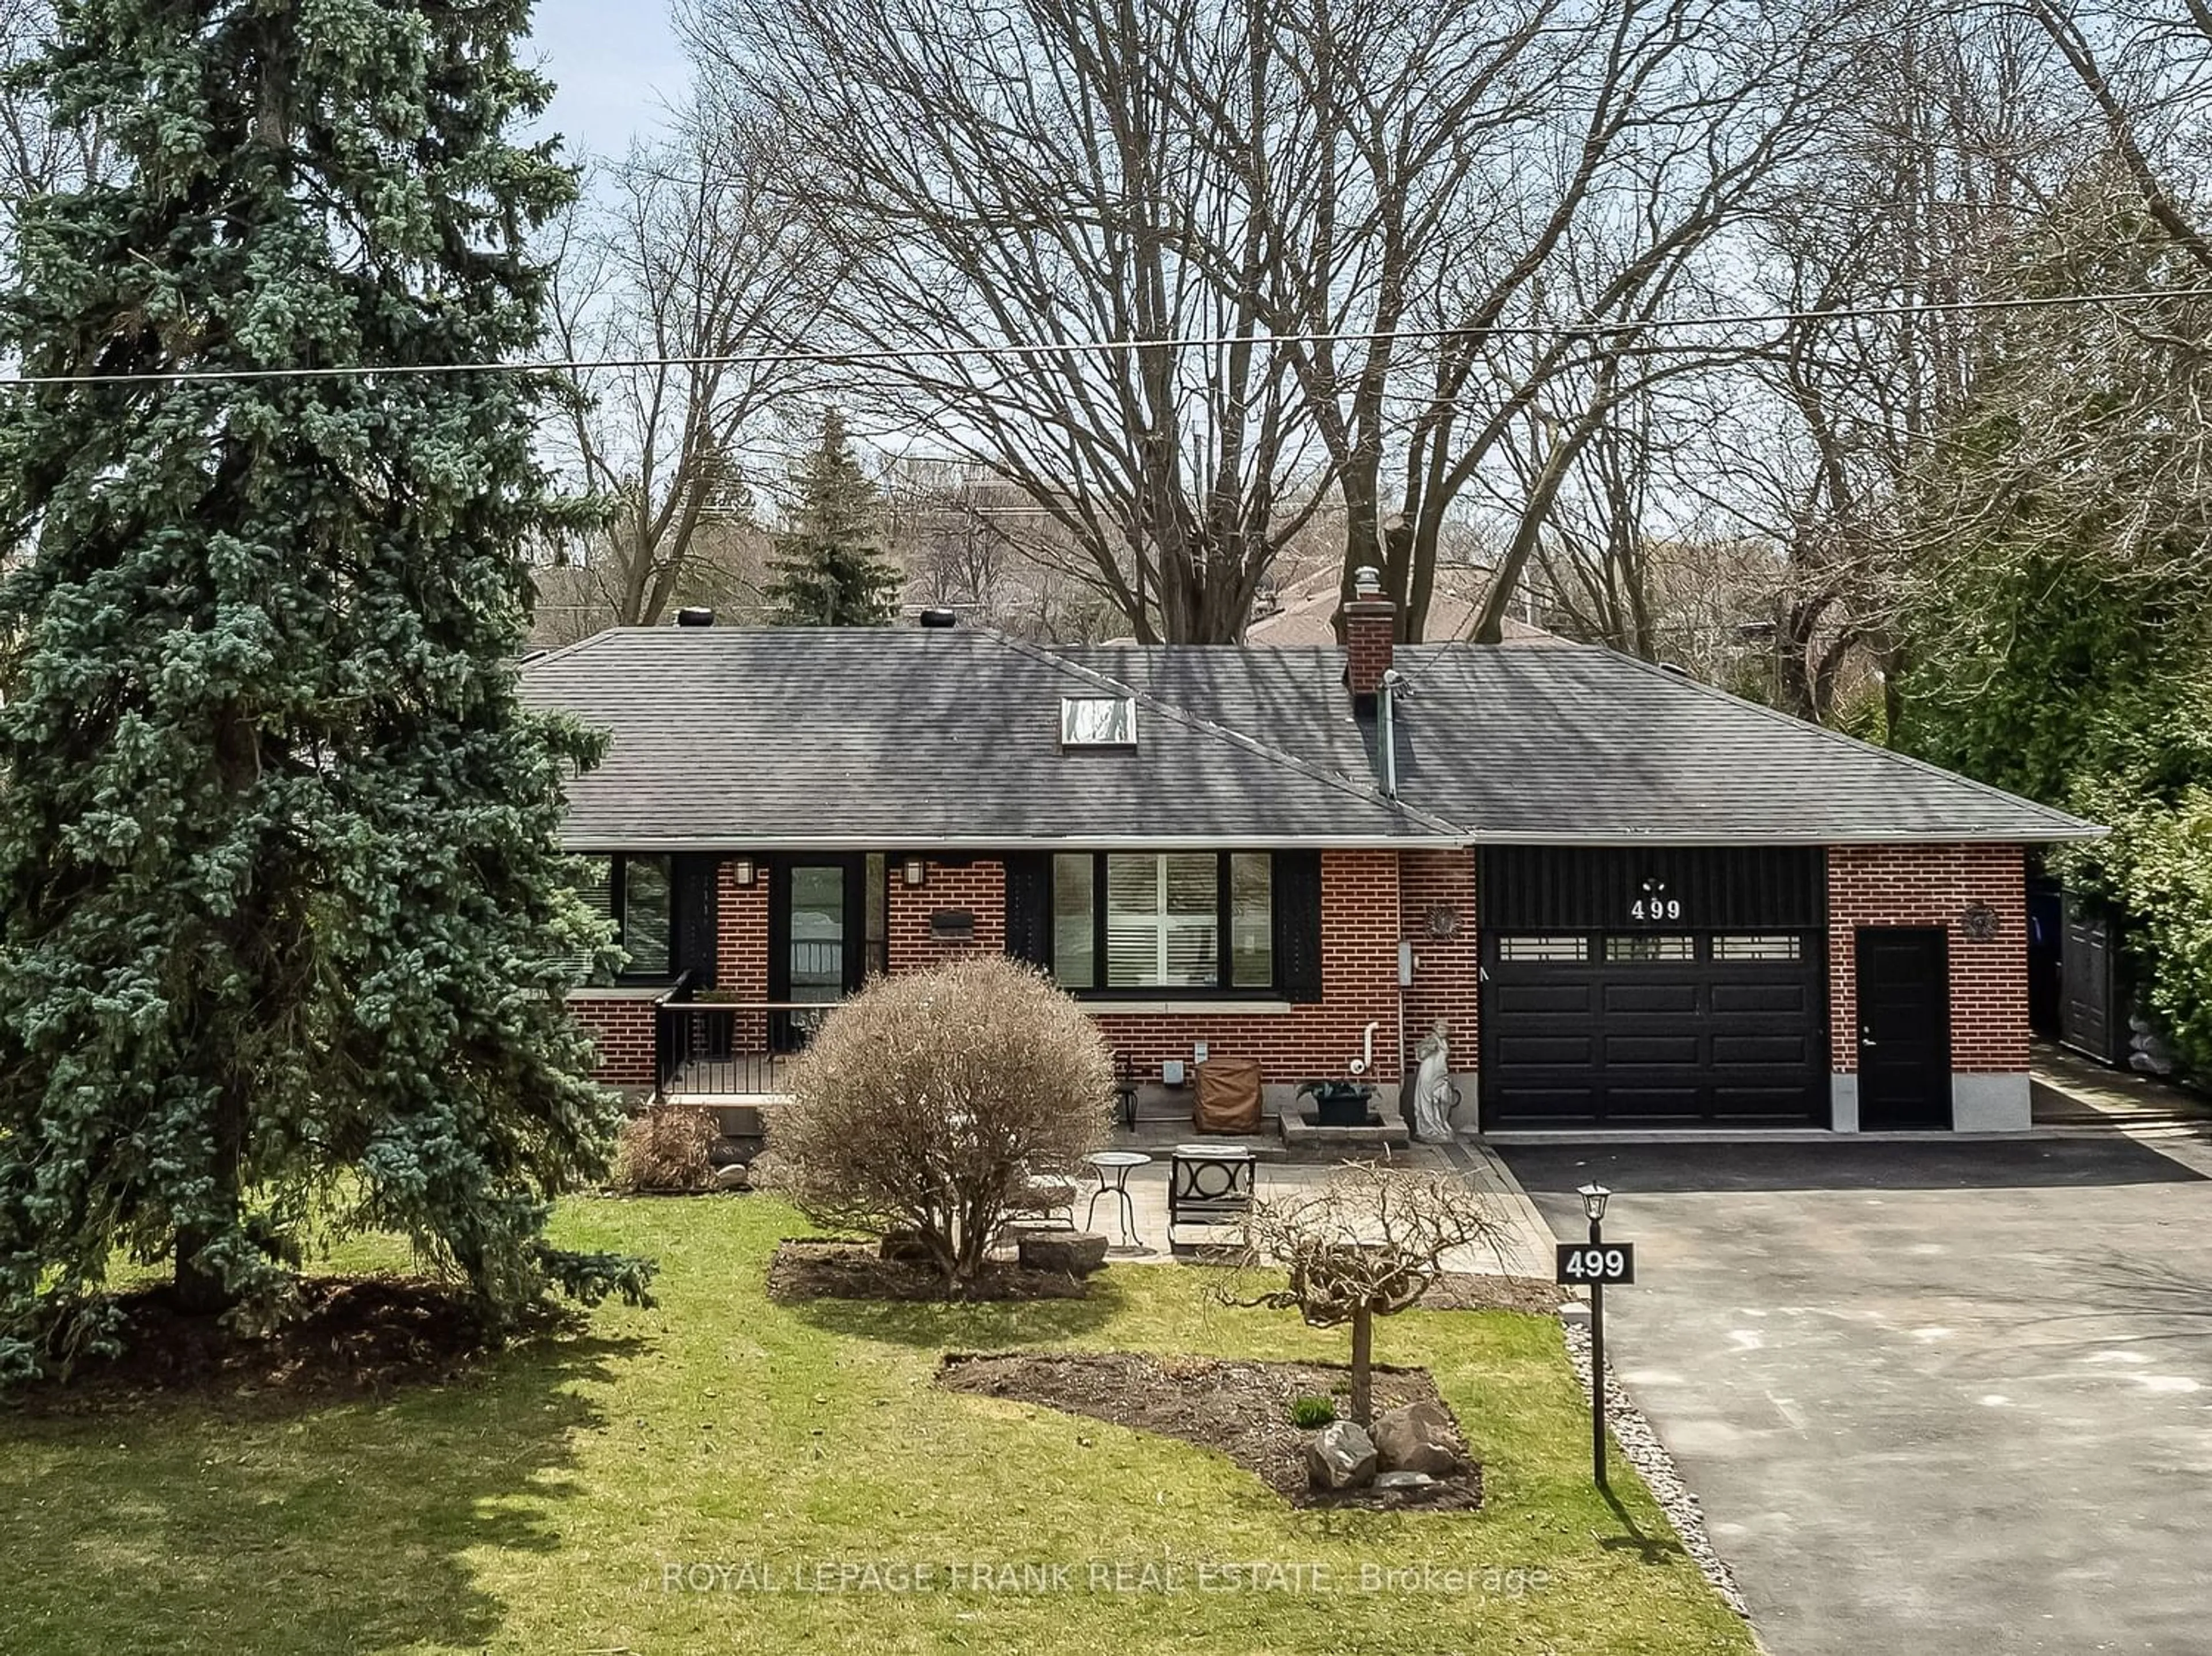 Home with brick exterior material for 499 Maine St, Oshawa Ontario L1L 1A2